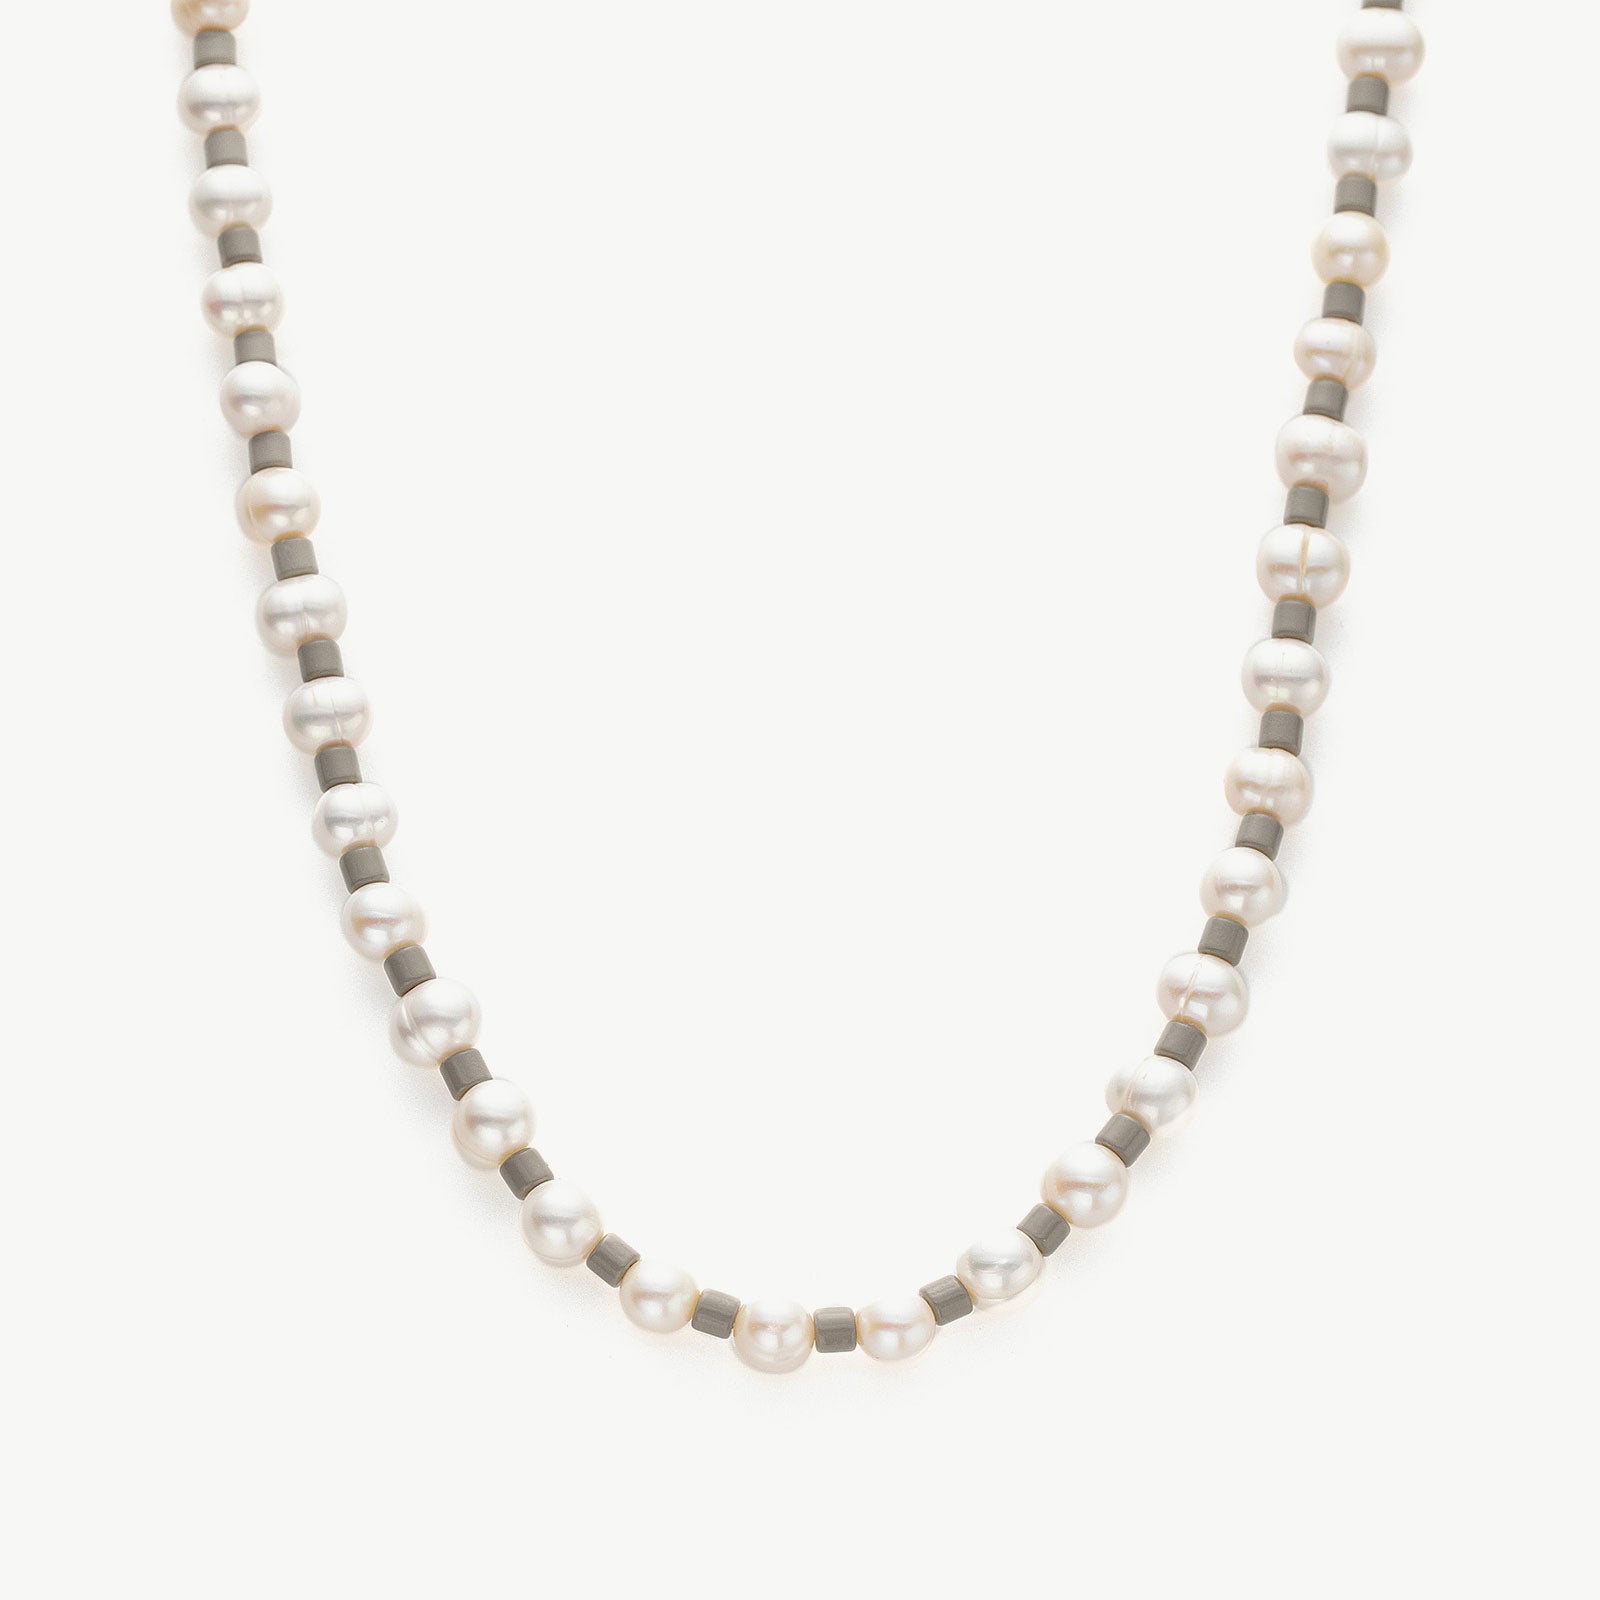 Pearl Beaded Necklace, radiating eternal pearl radiance, this necklace showcases a timeless strand of pearls, expressing enduring style and grace